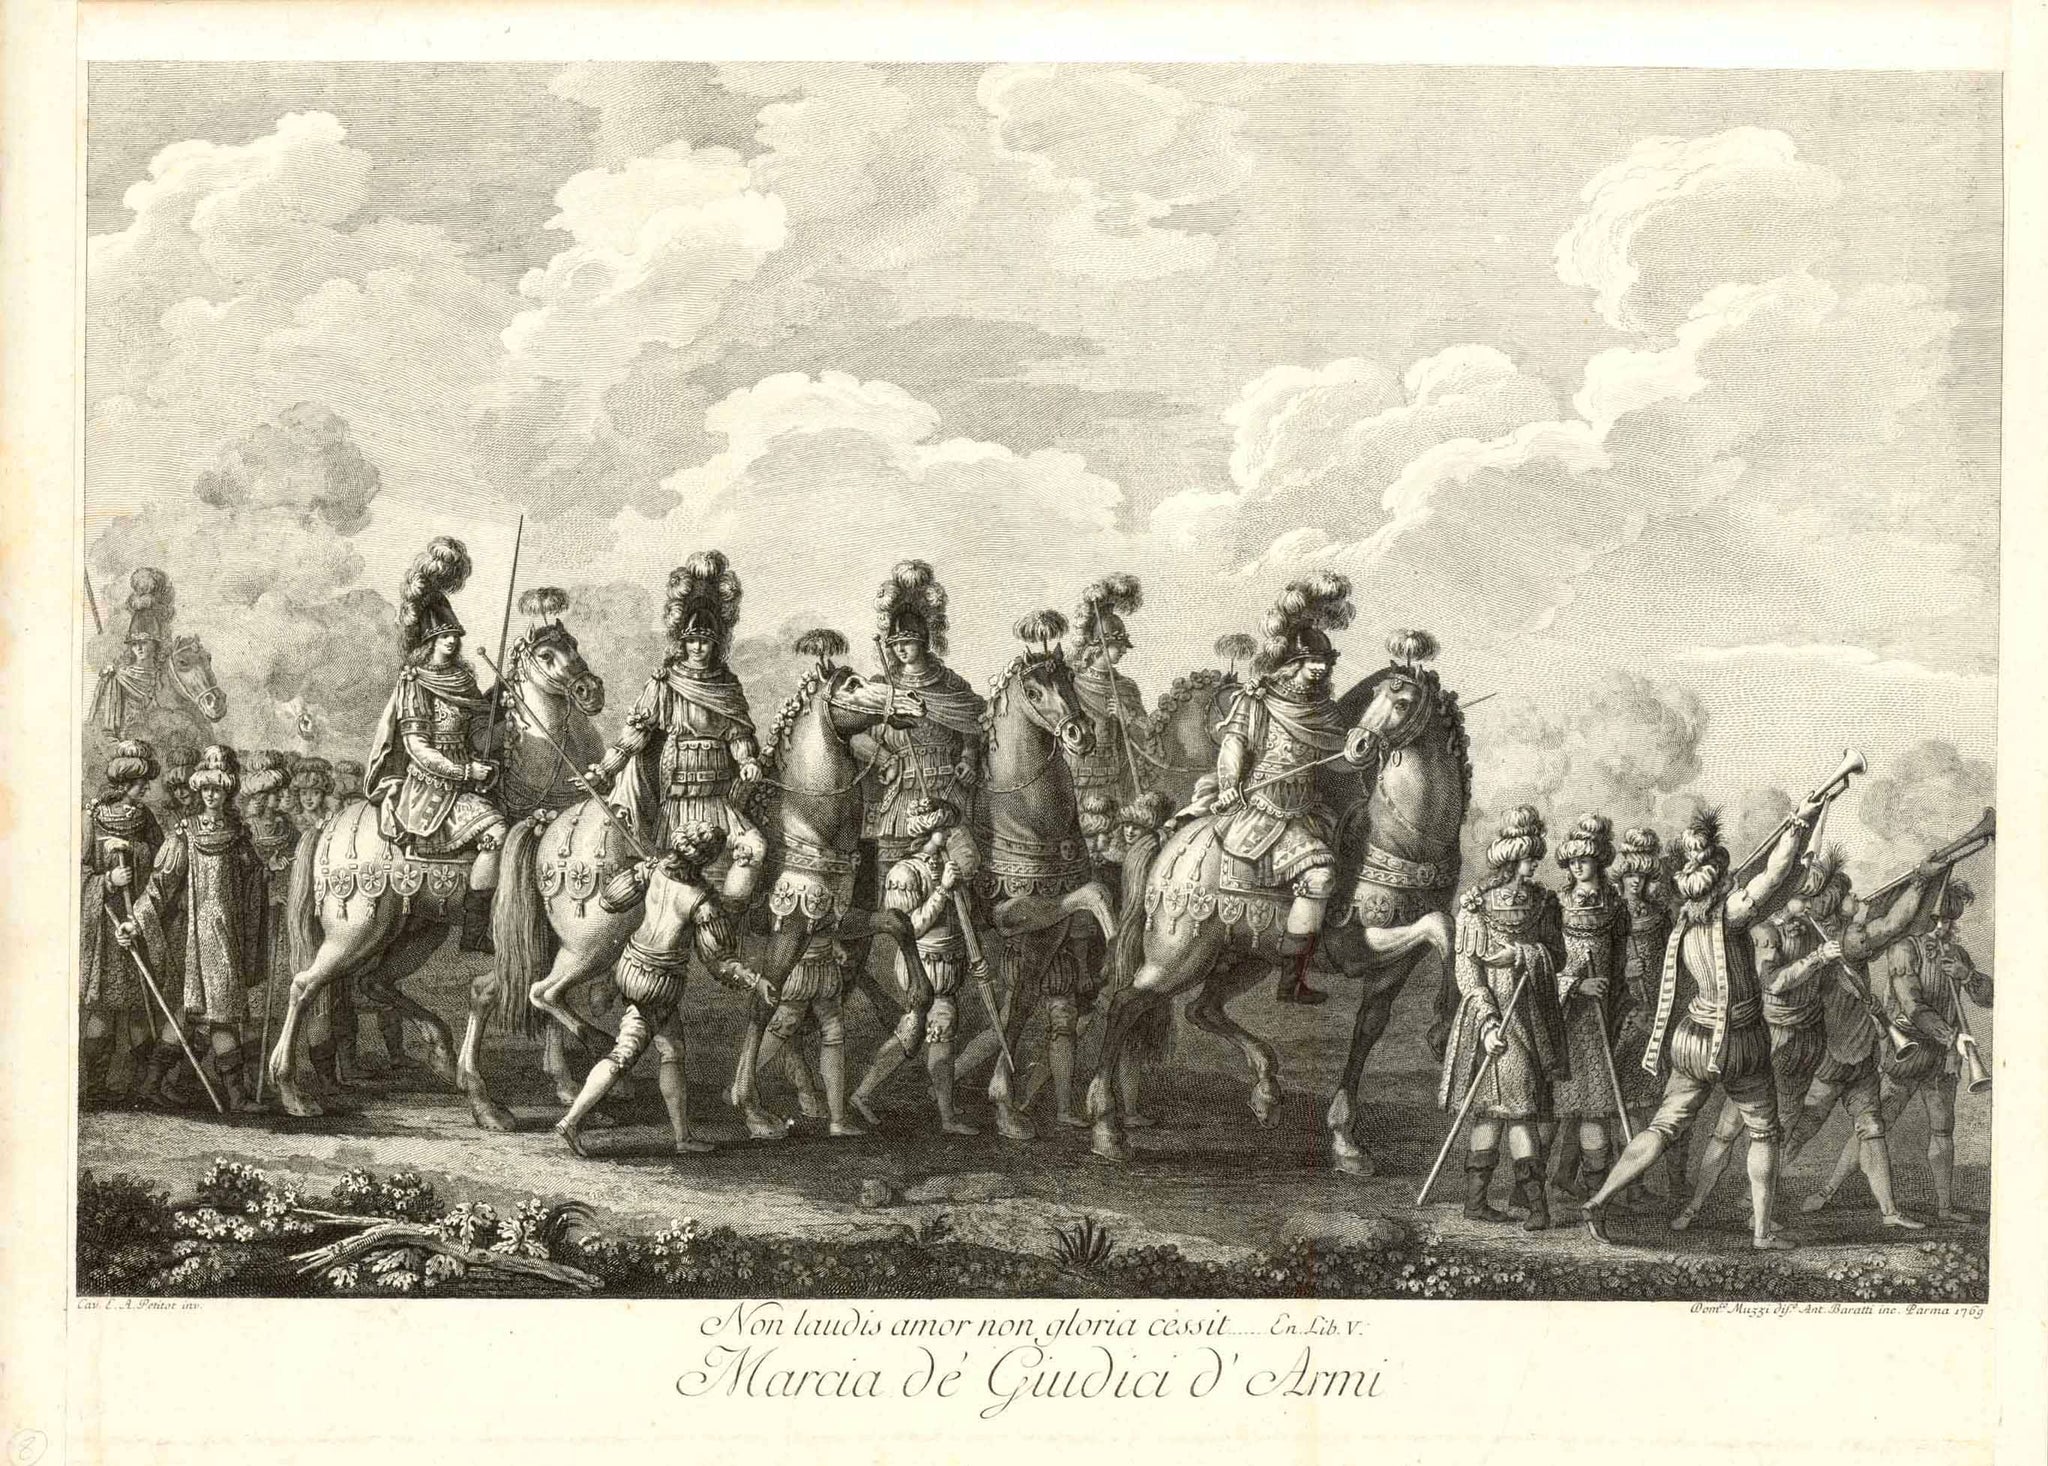 "Non laudis amor non gloria cessit"  "Marcia de Giudici d'Armi"  Entry of the referees of the weapons (for a joust) on horseback and on foot. In from of entry march fanfare players.  Copper etching by Antonio Baratti after the drawing by Domenico Muzzi and the painting by  Ennemond Alexandre Petitot (1727-1801)  Parma, 1769  Original antique print 